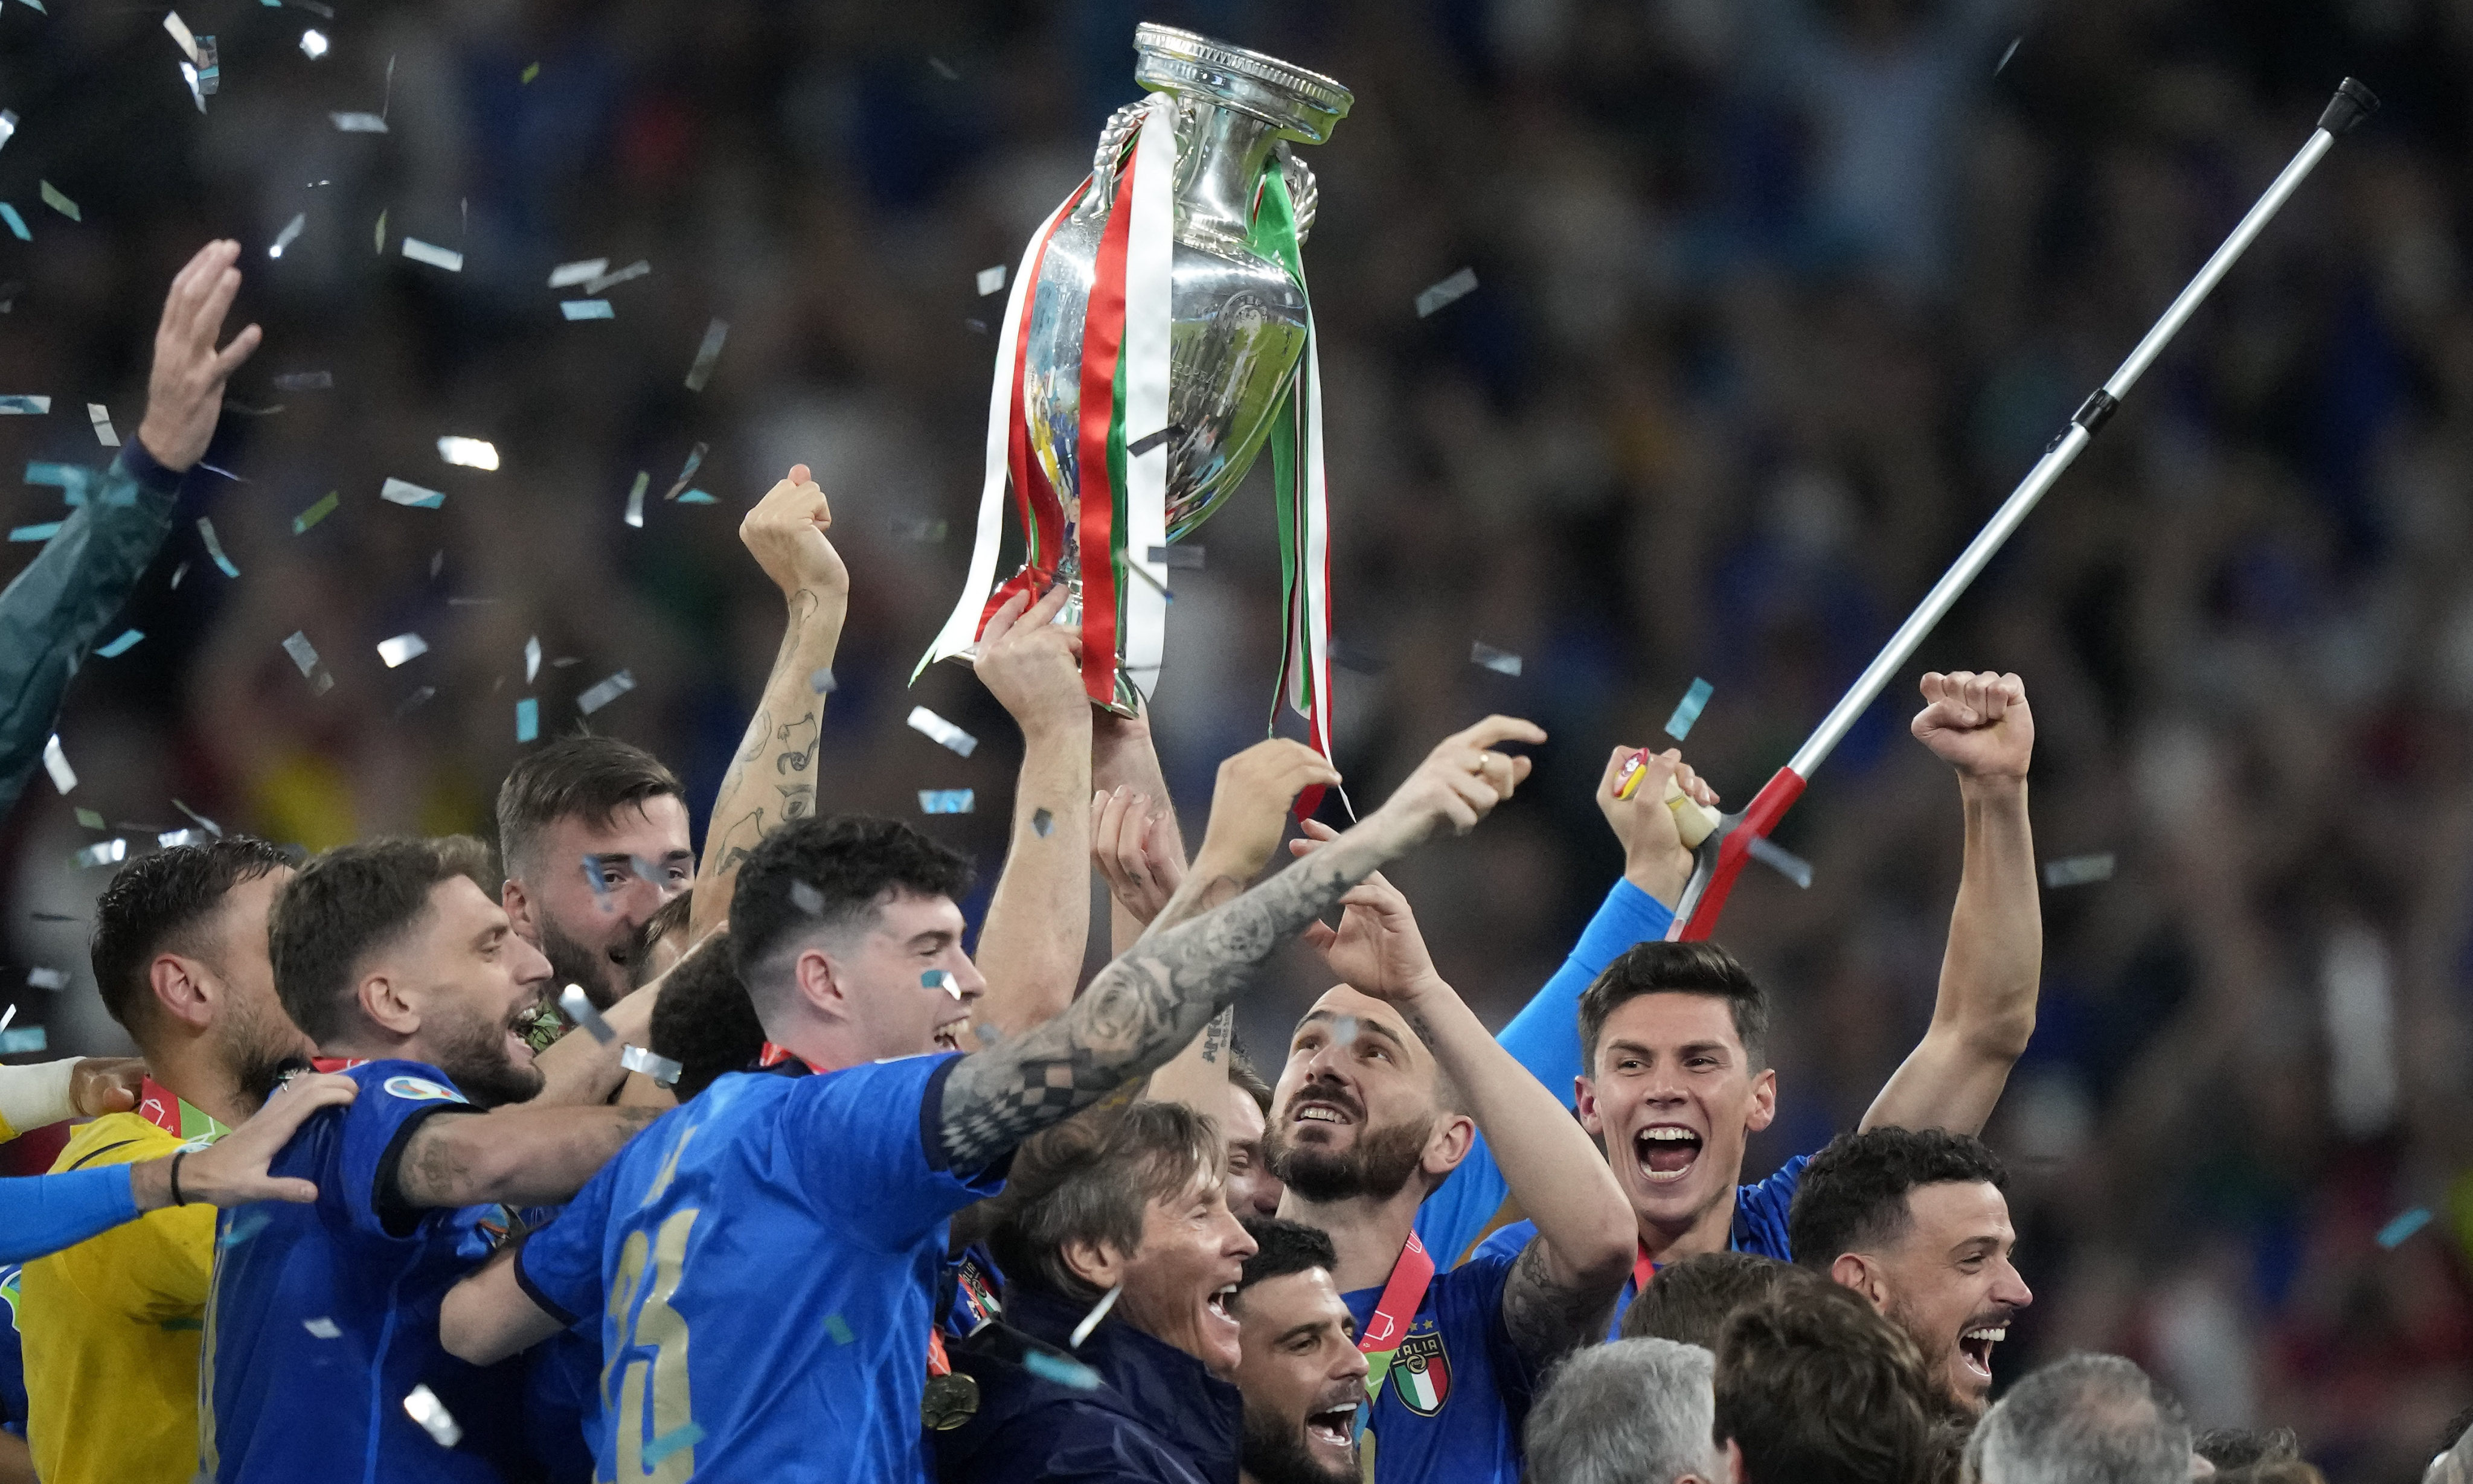 Euros holders Italy will be looking to defend the trophy they claimed three years ago, in Germany. Photo: AP